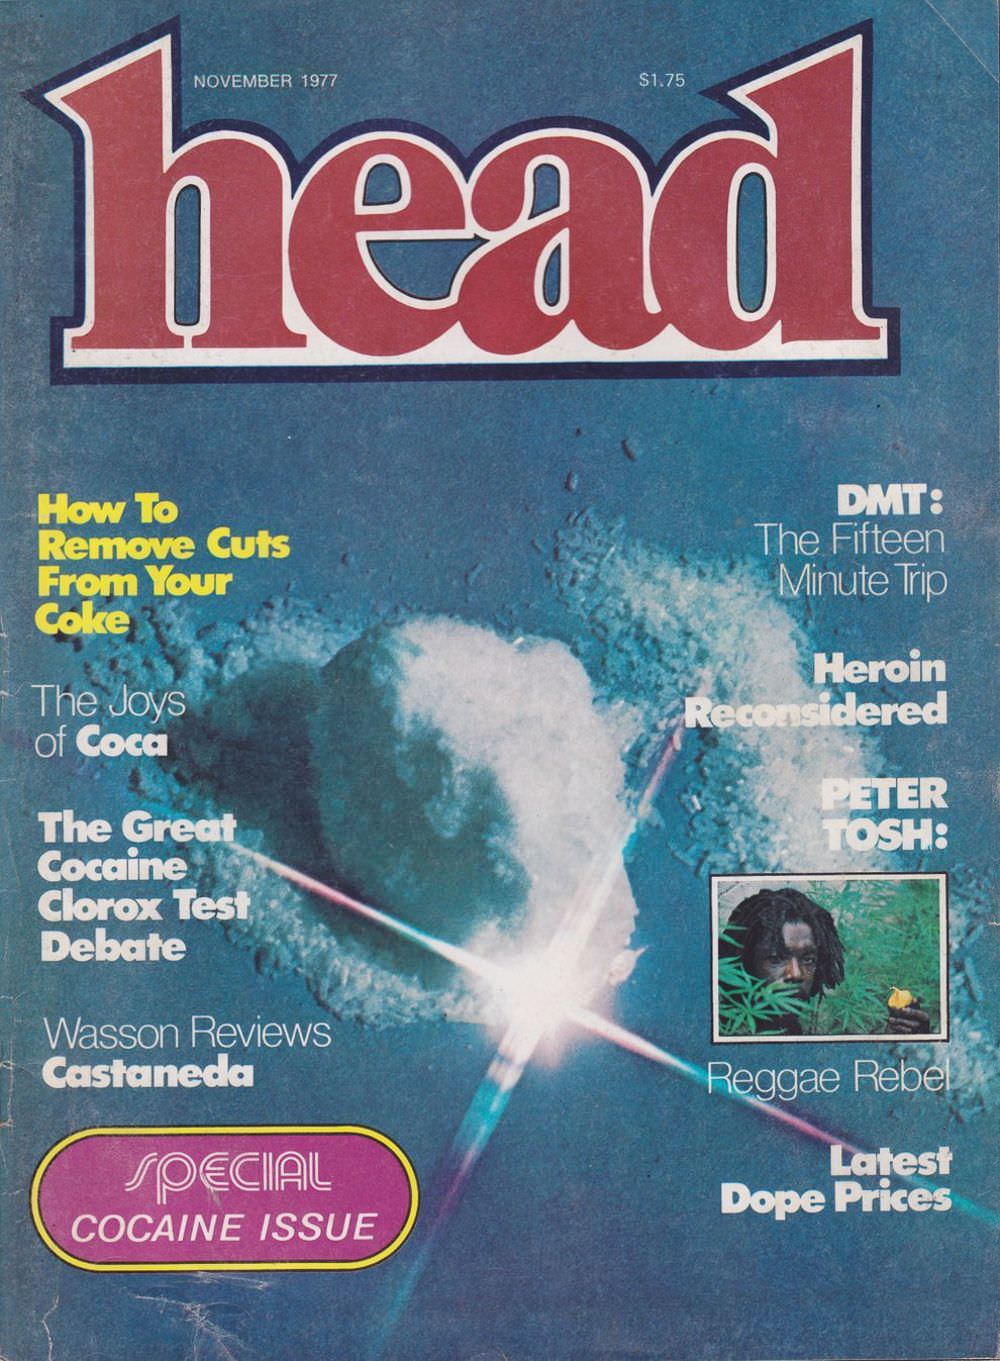 Head magazine informed its readers about the latest dope prices and how to remove cuts from coke.